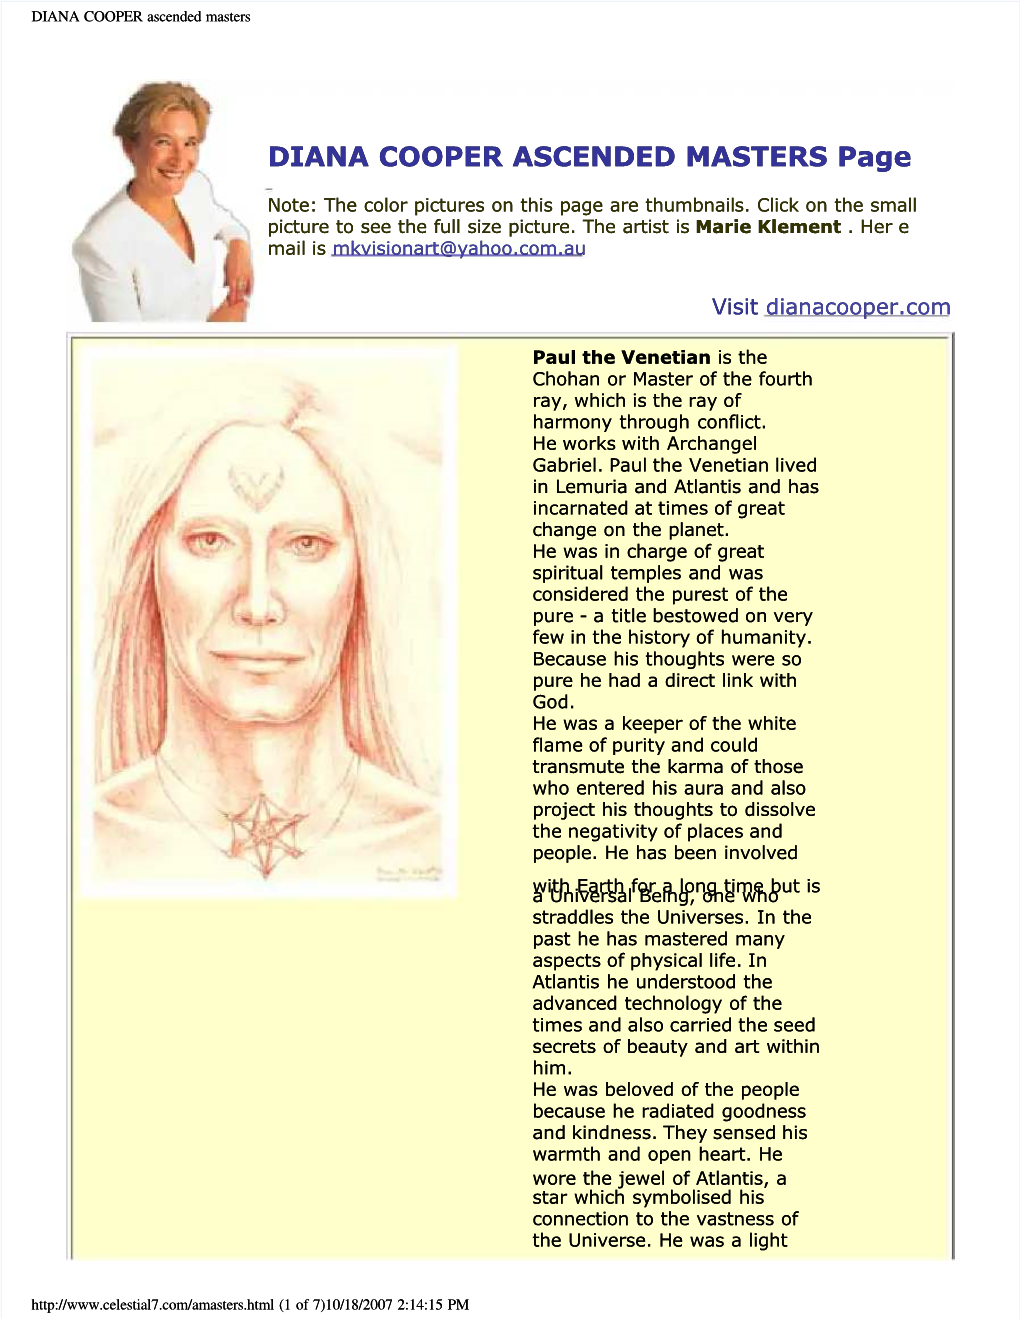 DIANA COOPER ASCENDED MASTERS Page